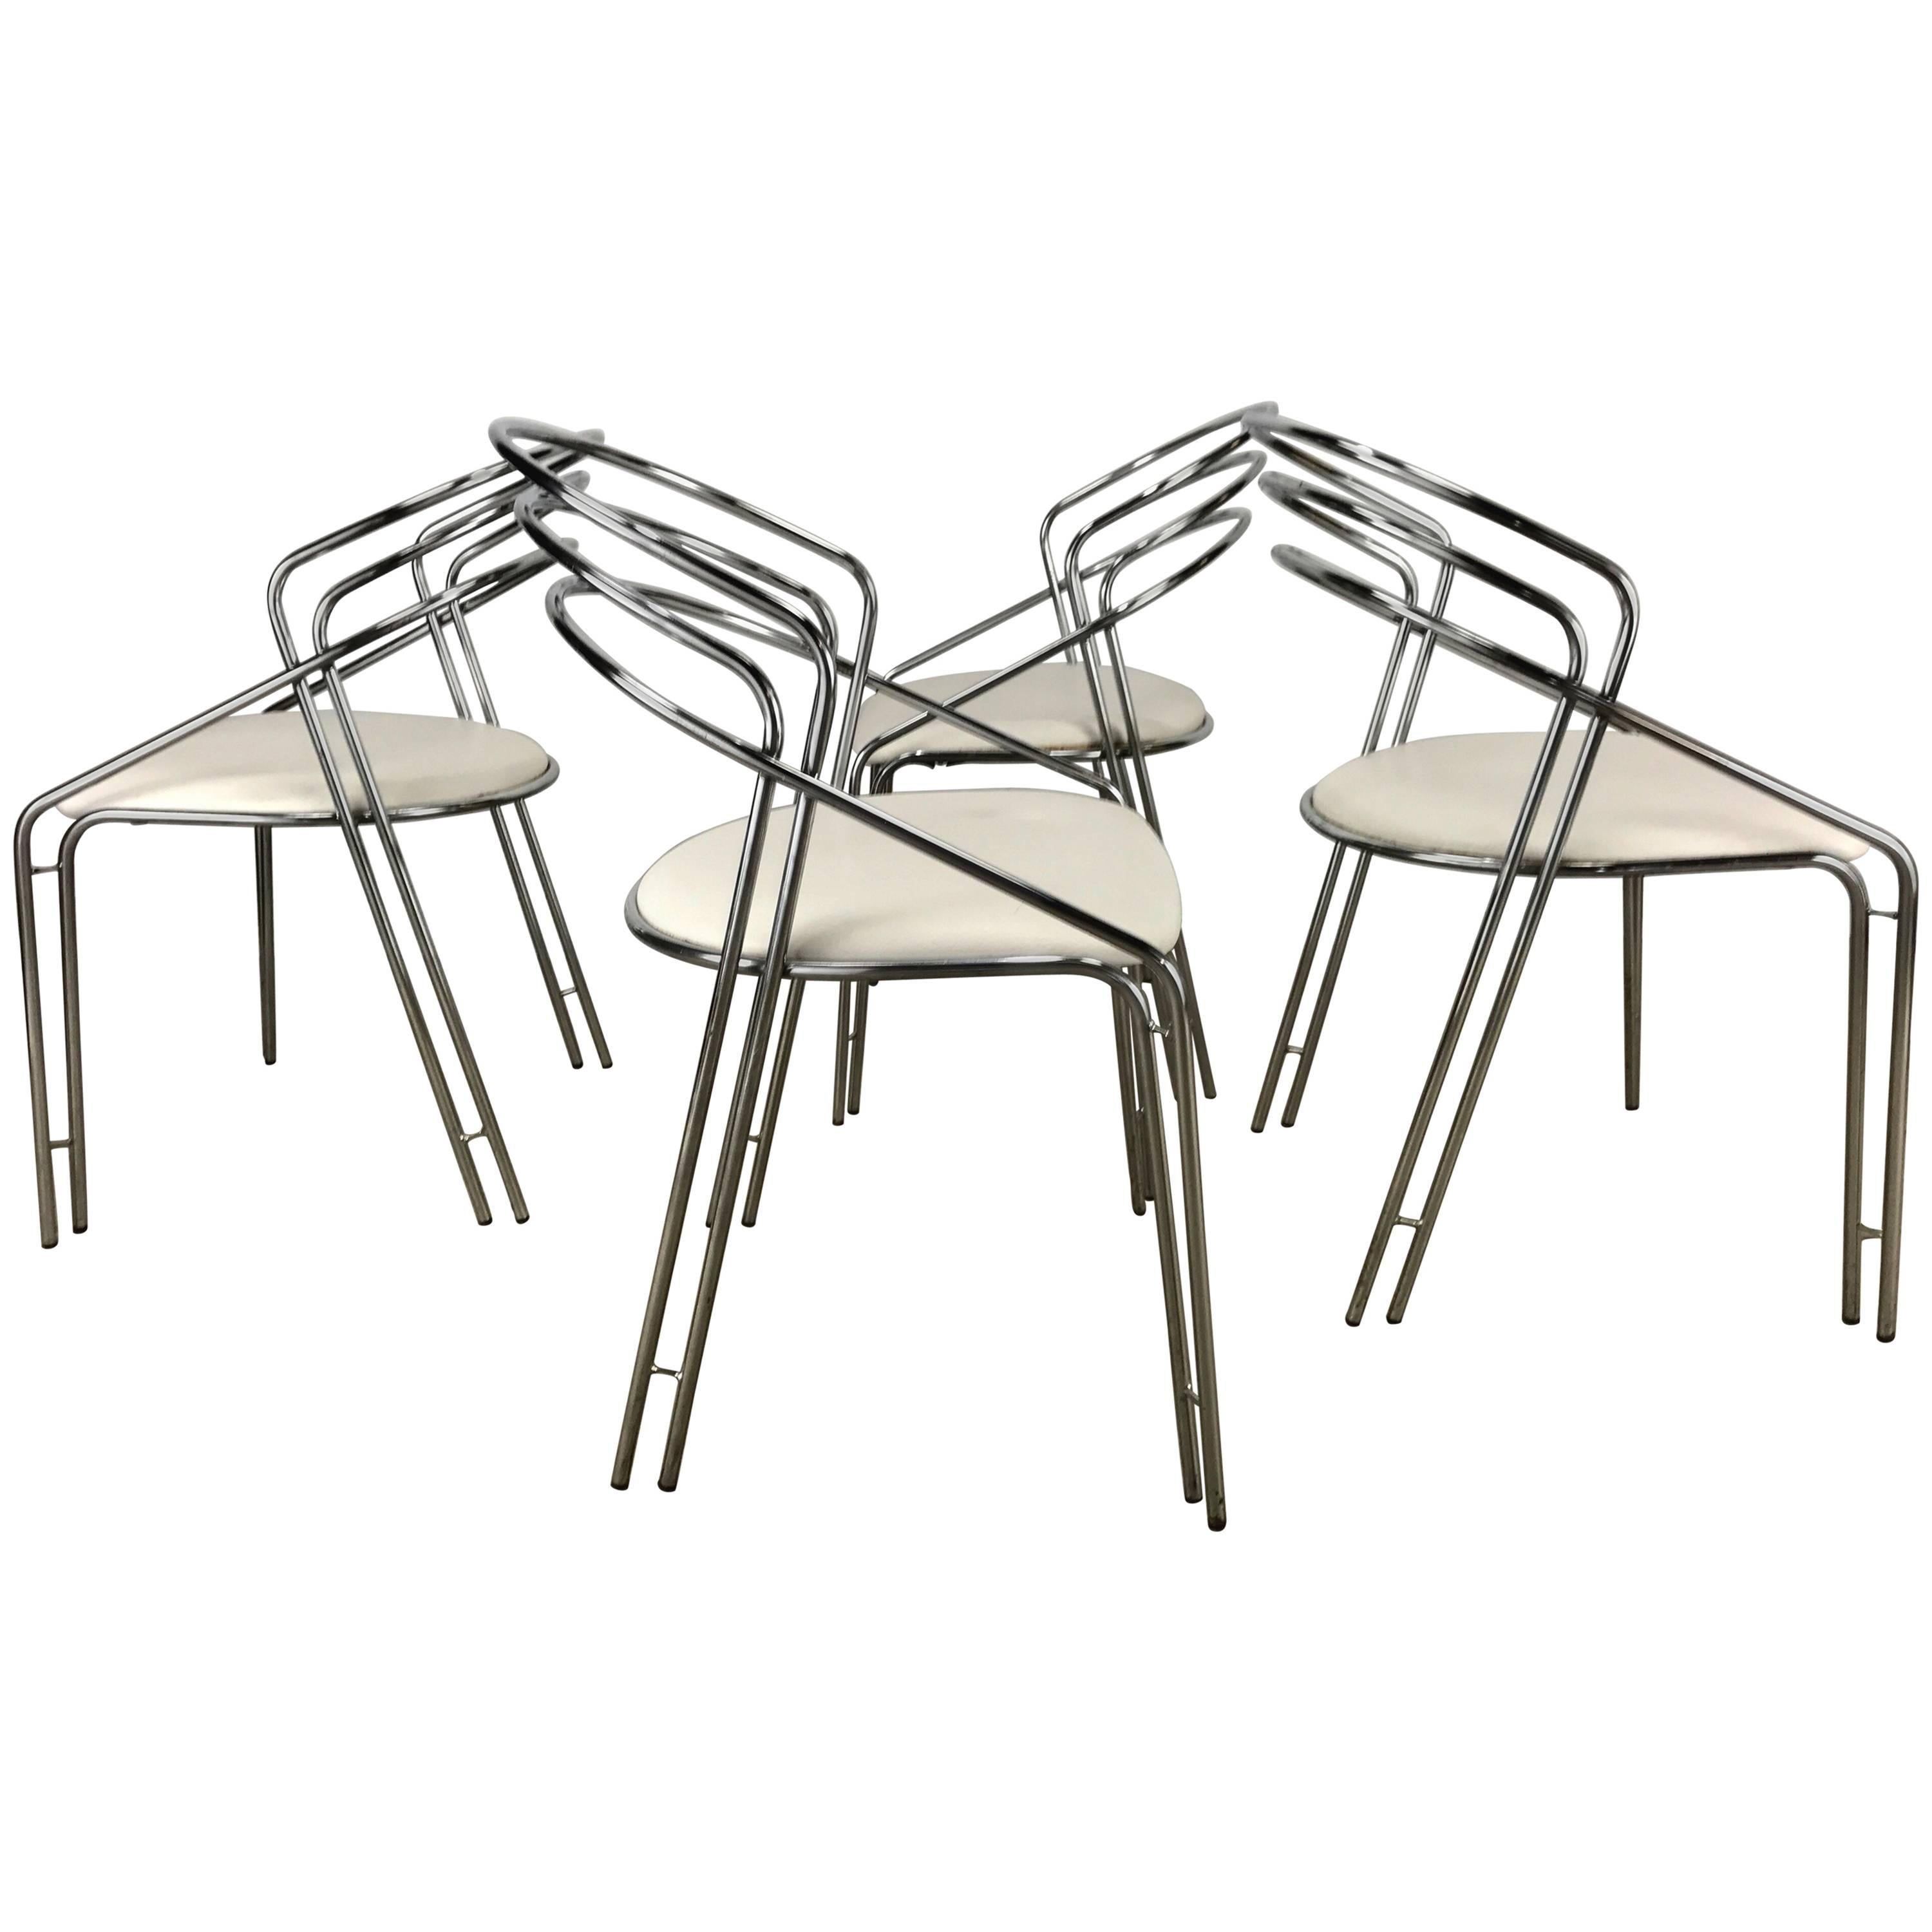 Set of Four Postmodern Chrome /White Italian Arm /Dining Chairs, Made in Italy